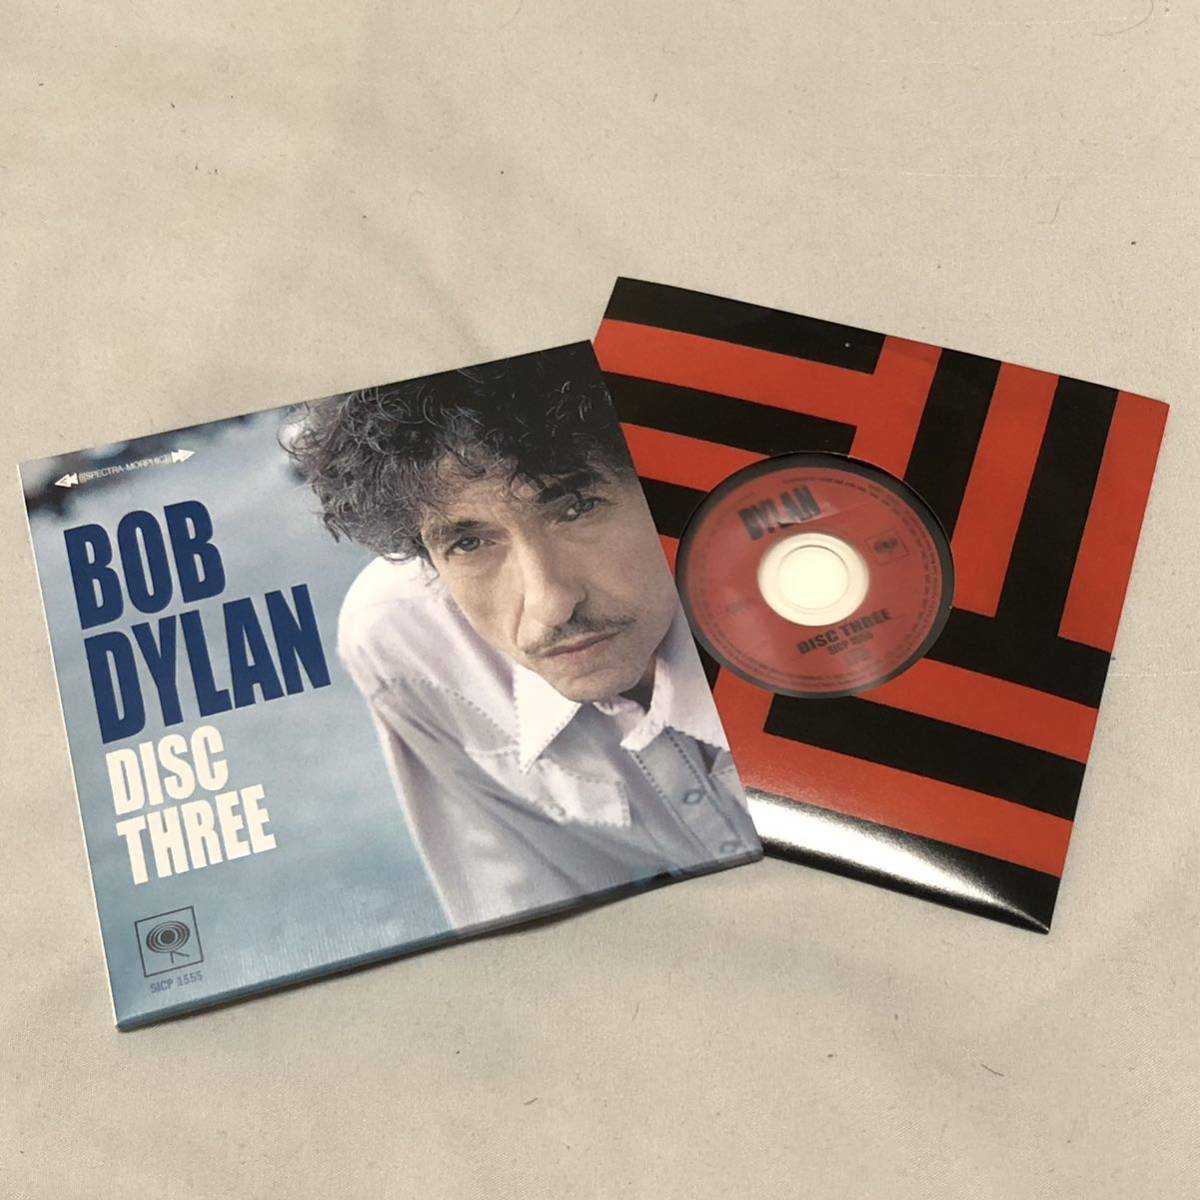  Bob ti Ran / BOB DYLAN - DYLAN (3CD BOX Deluxe Edition) complete production limitation Deluxe specification 